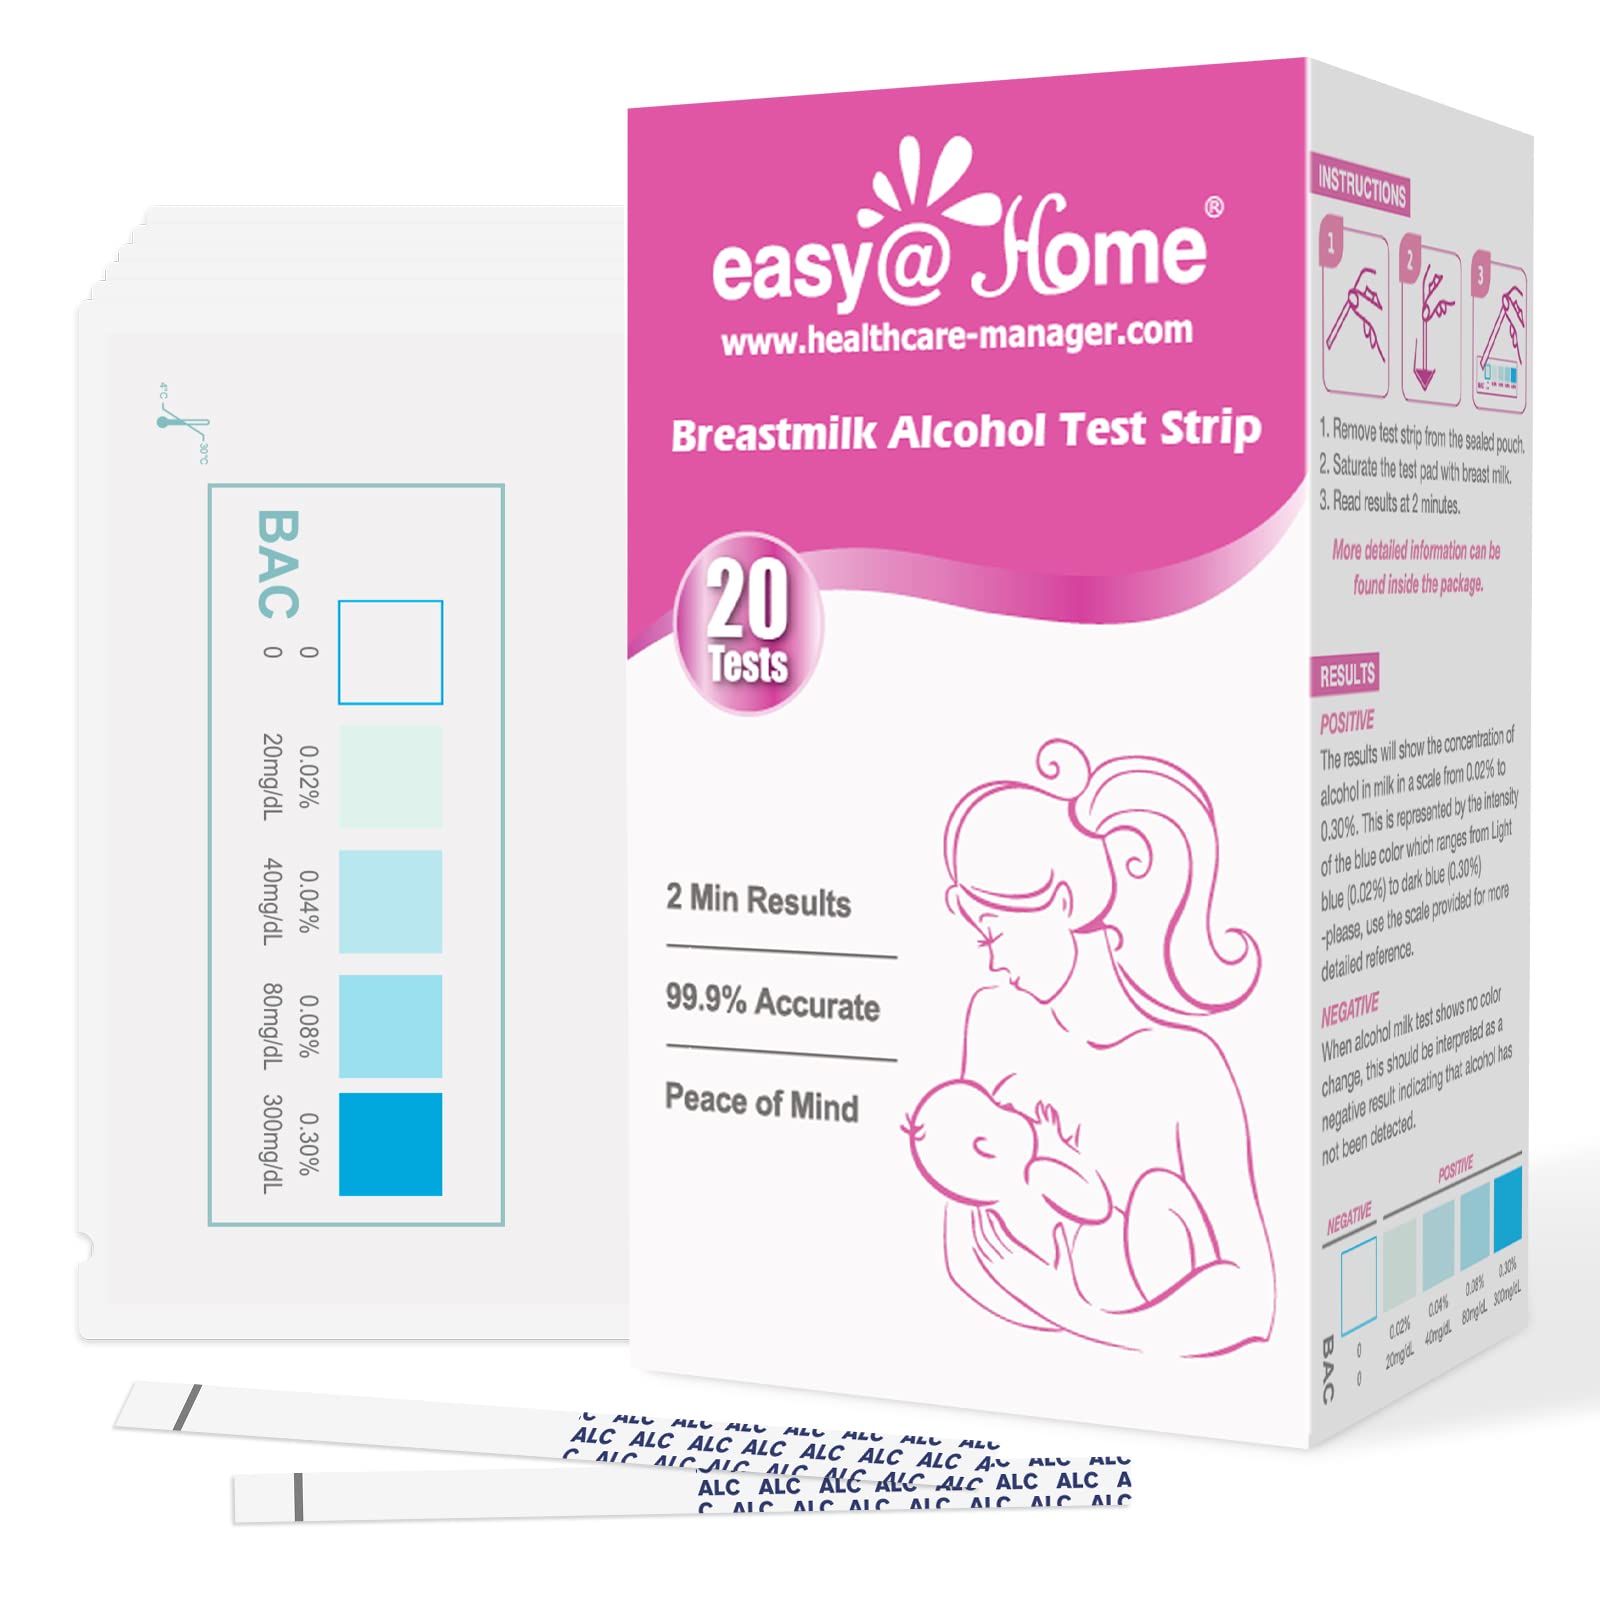 Easy Home Breastmilk Alcohol Test Strips at Home Alcohol Test for